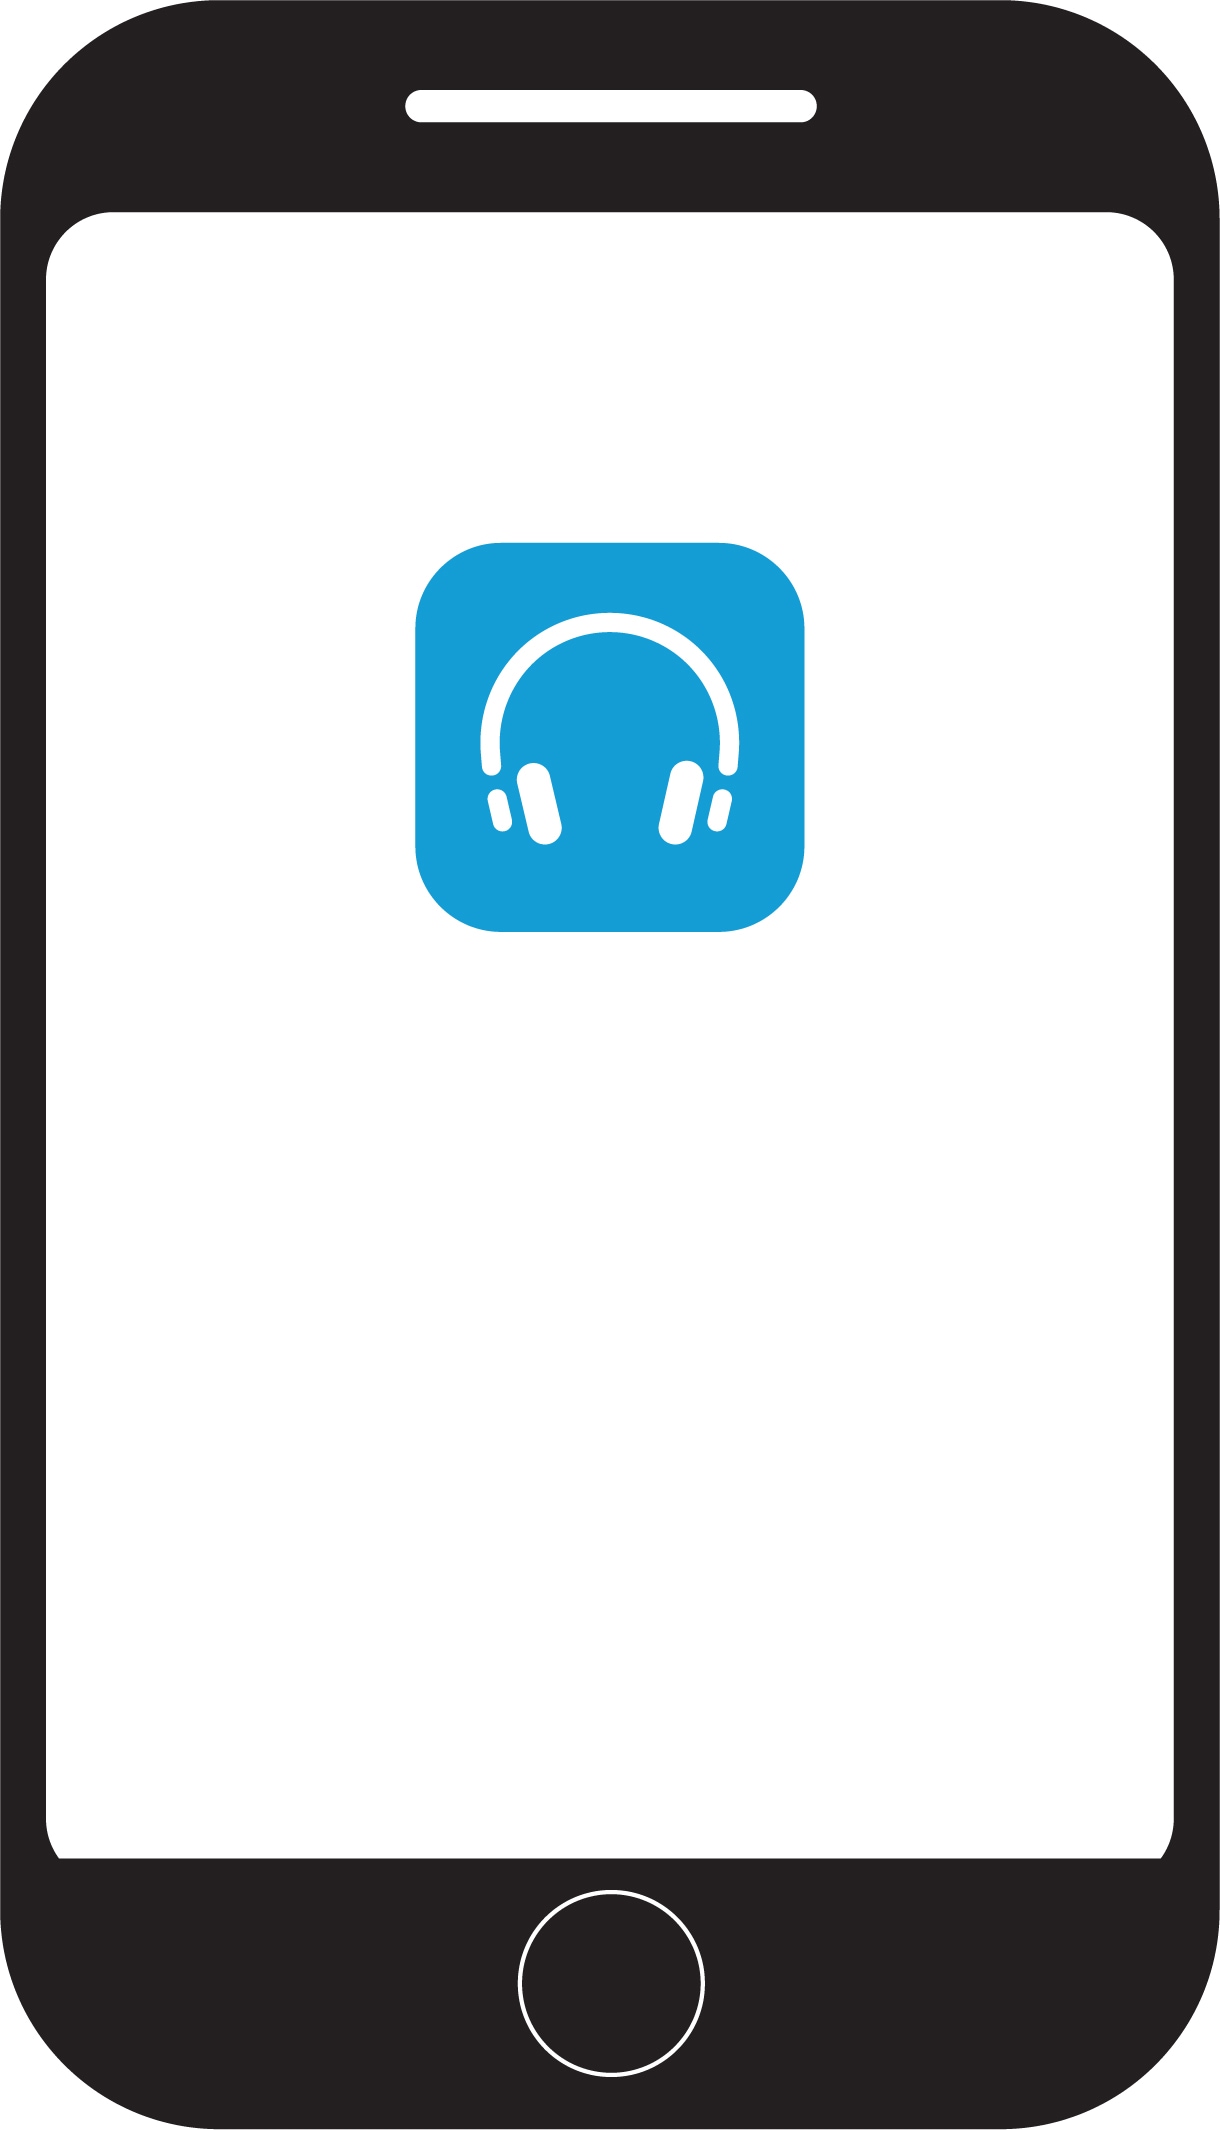 Cisco Headsets app logo on a mobile screen